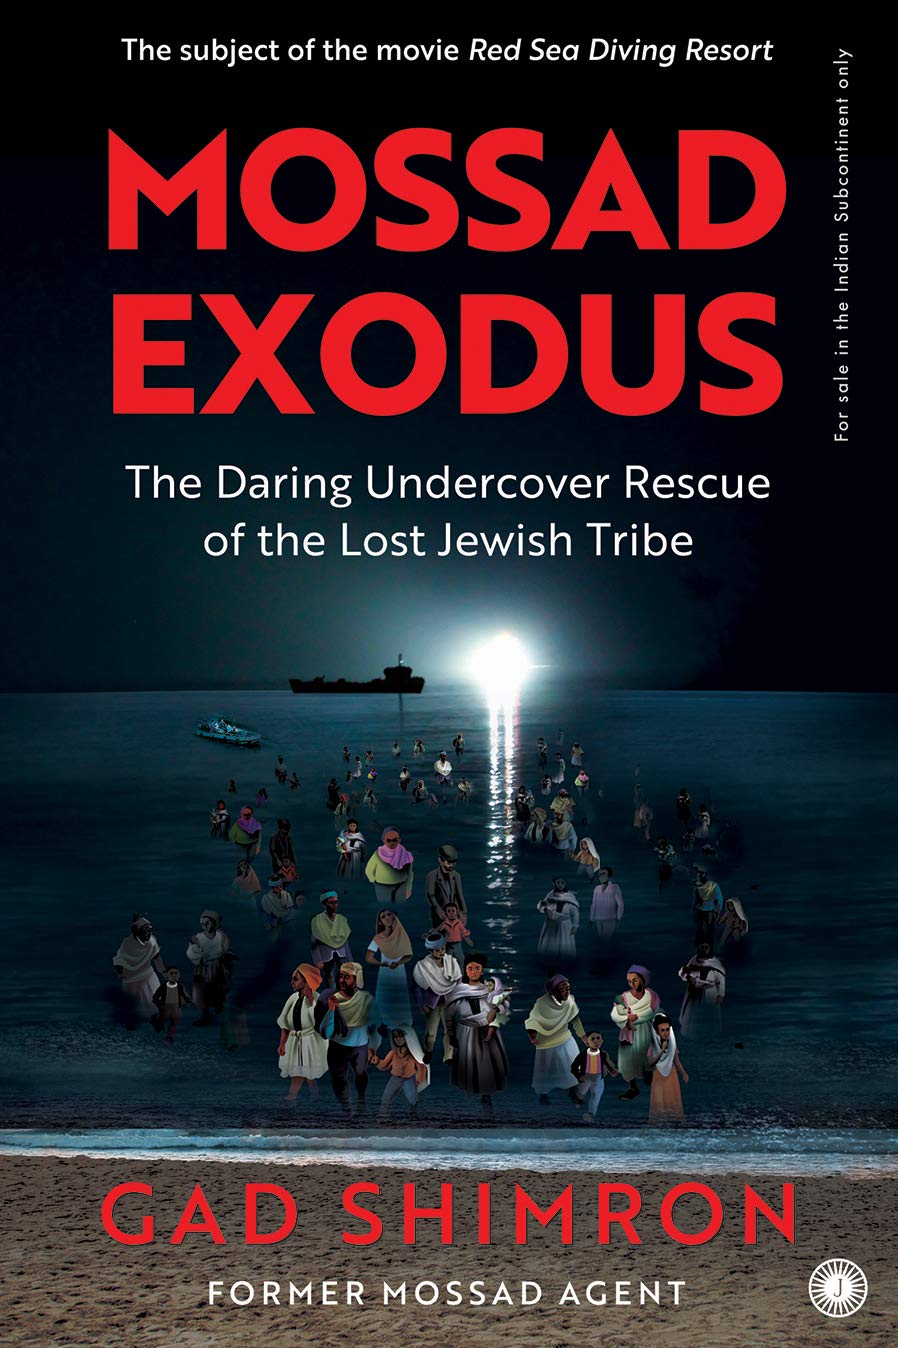 Mossad Exodus (The Daring Undercover Rescue of the Lost Jewish Tribe)